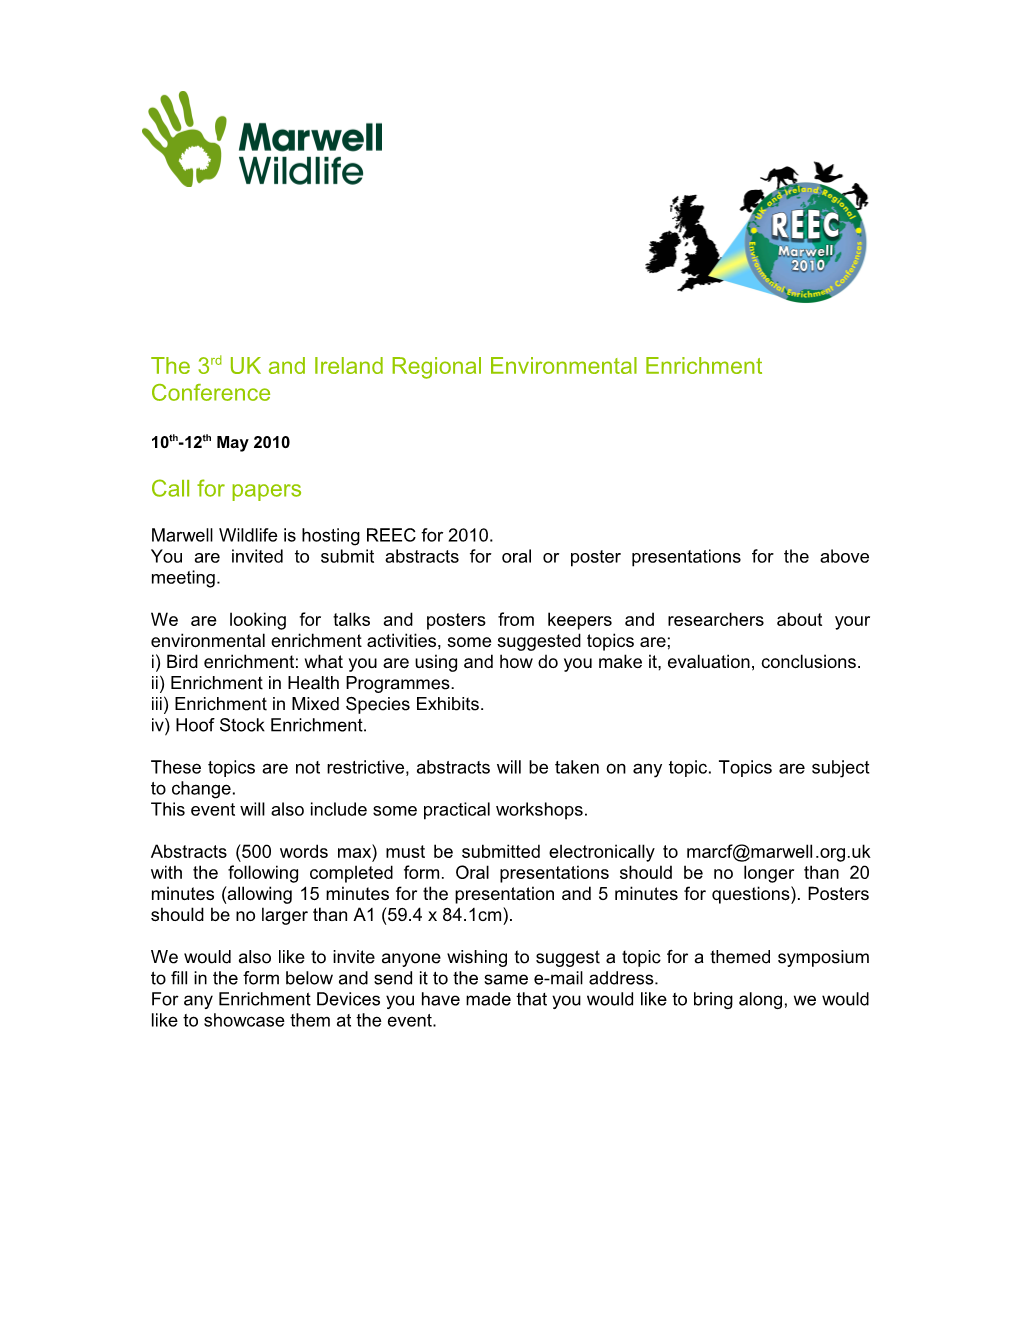 The 1St UK and Ireland Regional Environmental Enrichment Conference